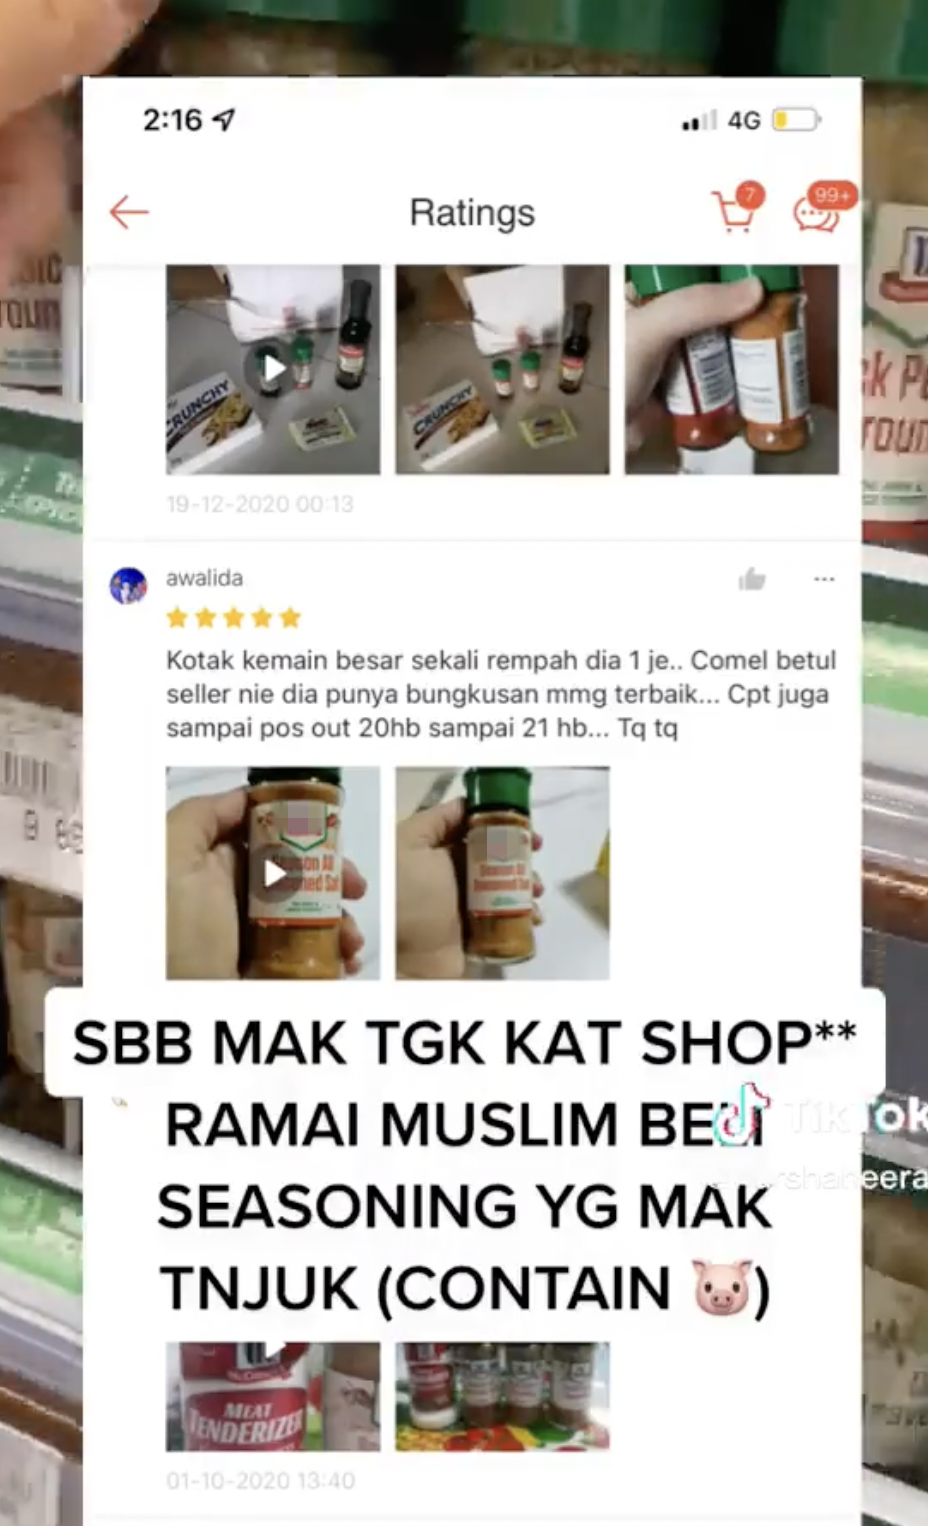 M'sian Woman Claims Cajun Seasoning Contains Pork, Turns Out She Read Label  Wrongly